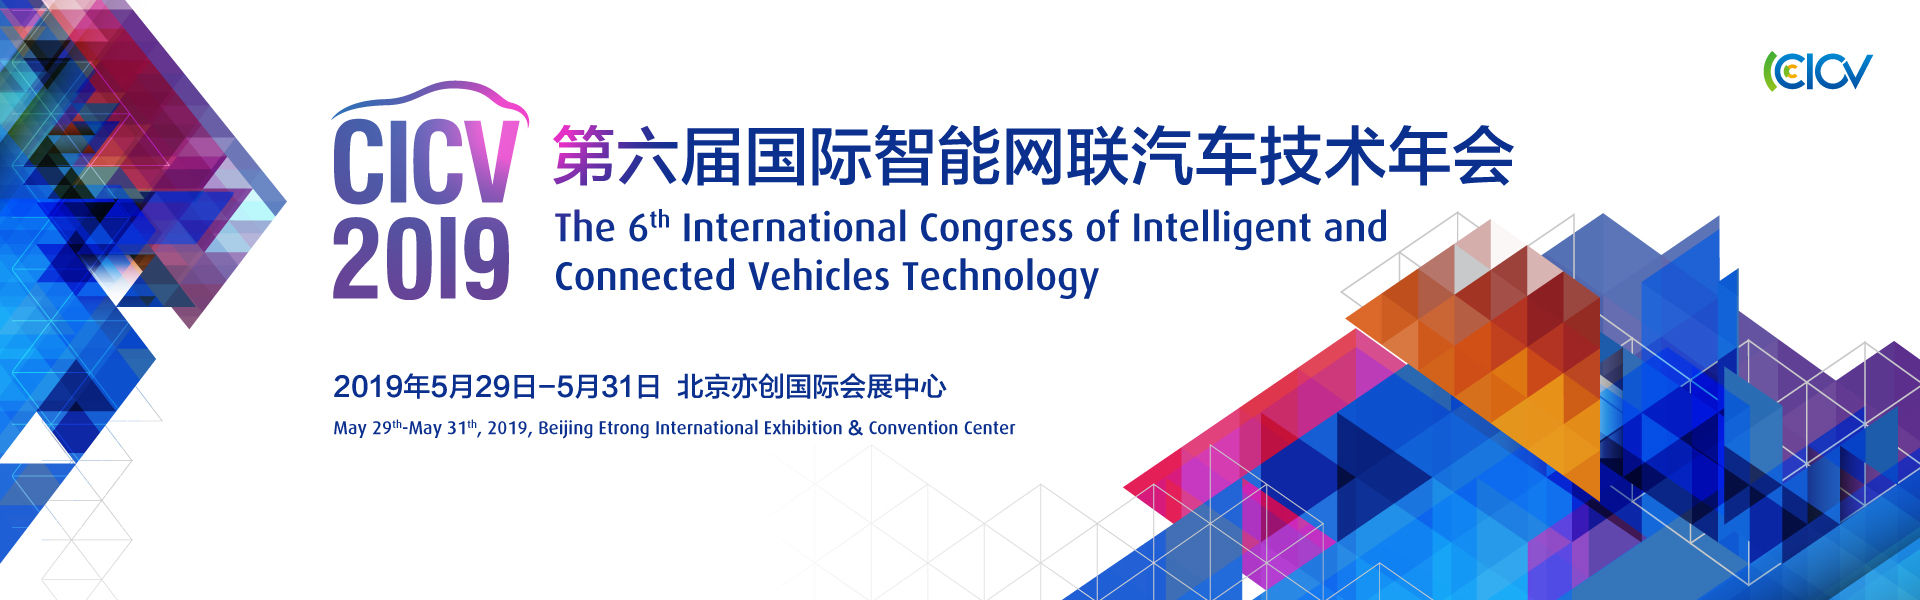 The 6th International Congress of Intelligent and Connected Vehicles Technology-Visitor